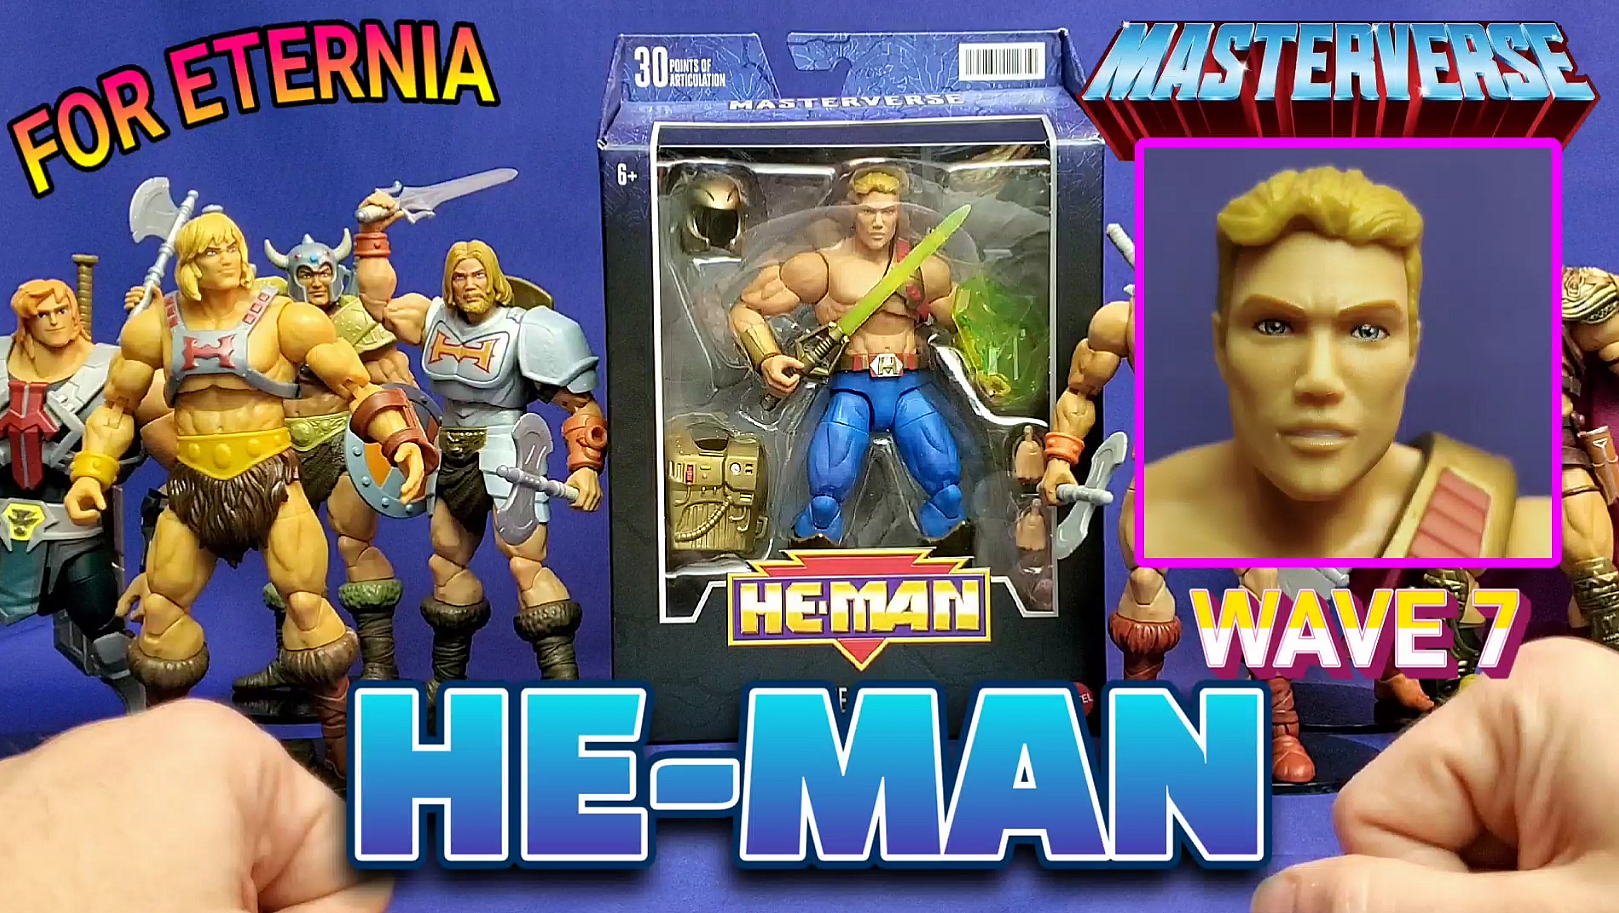 Watch our UNBOXING & REVIEW of He-Man, the Wave 7 New Adventures Galactic Protector Masterverse figure